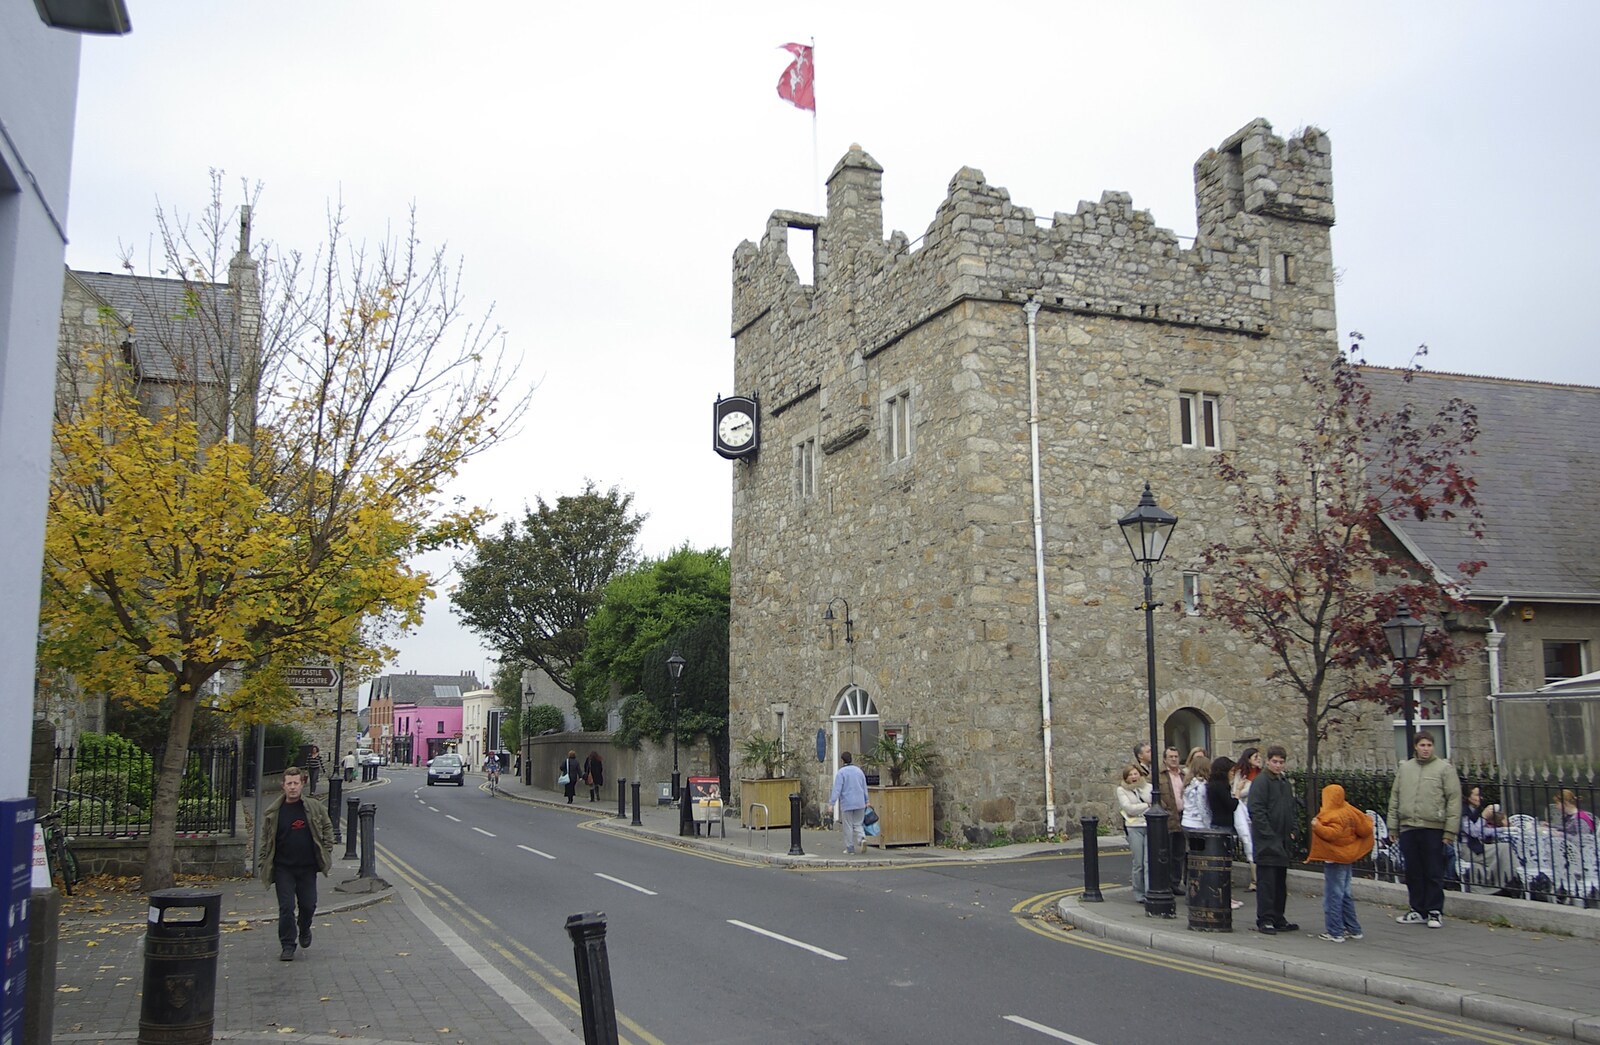 Dalkey castle keep from Apple Pressing, and Isobel's 30th in Blackrock, Dublin, Ireland - 2nd November 2007